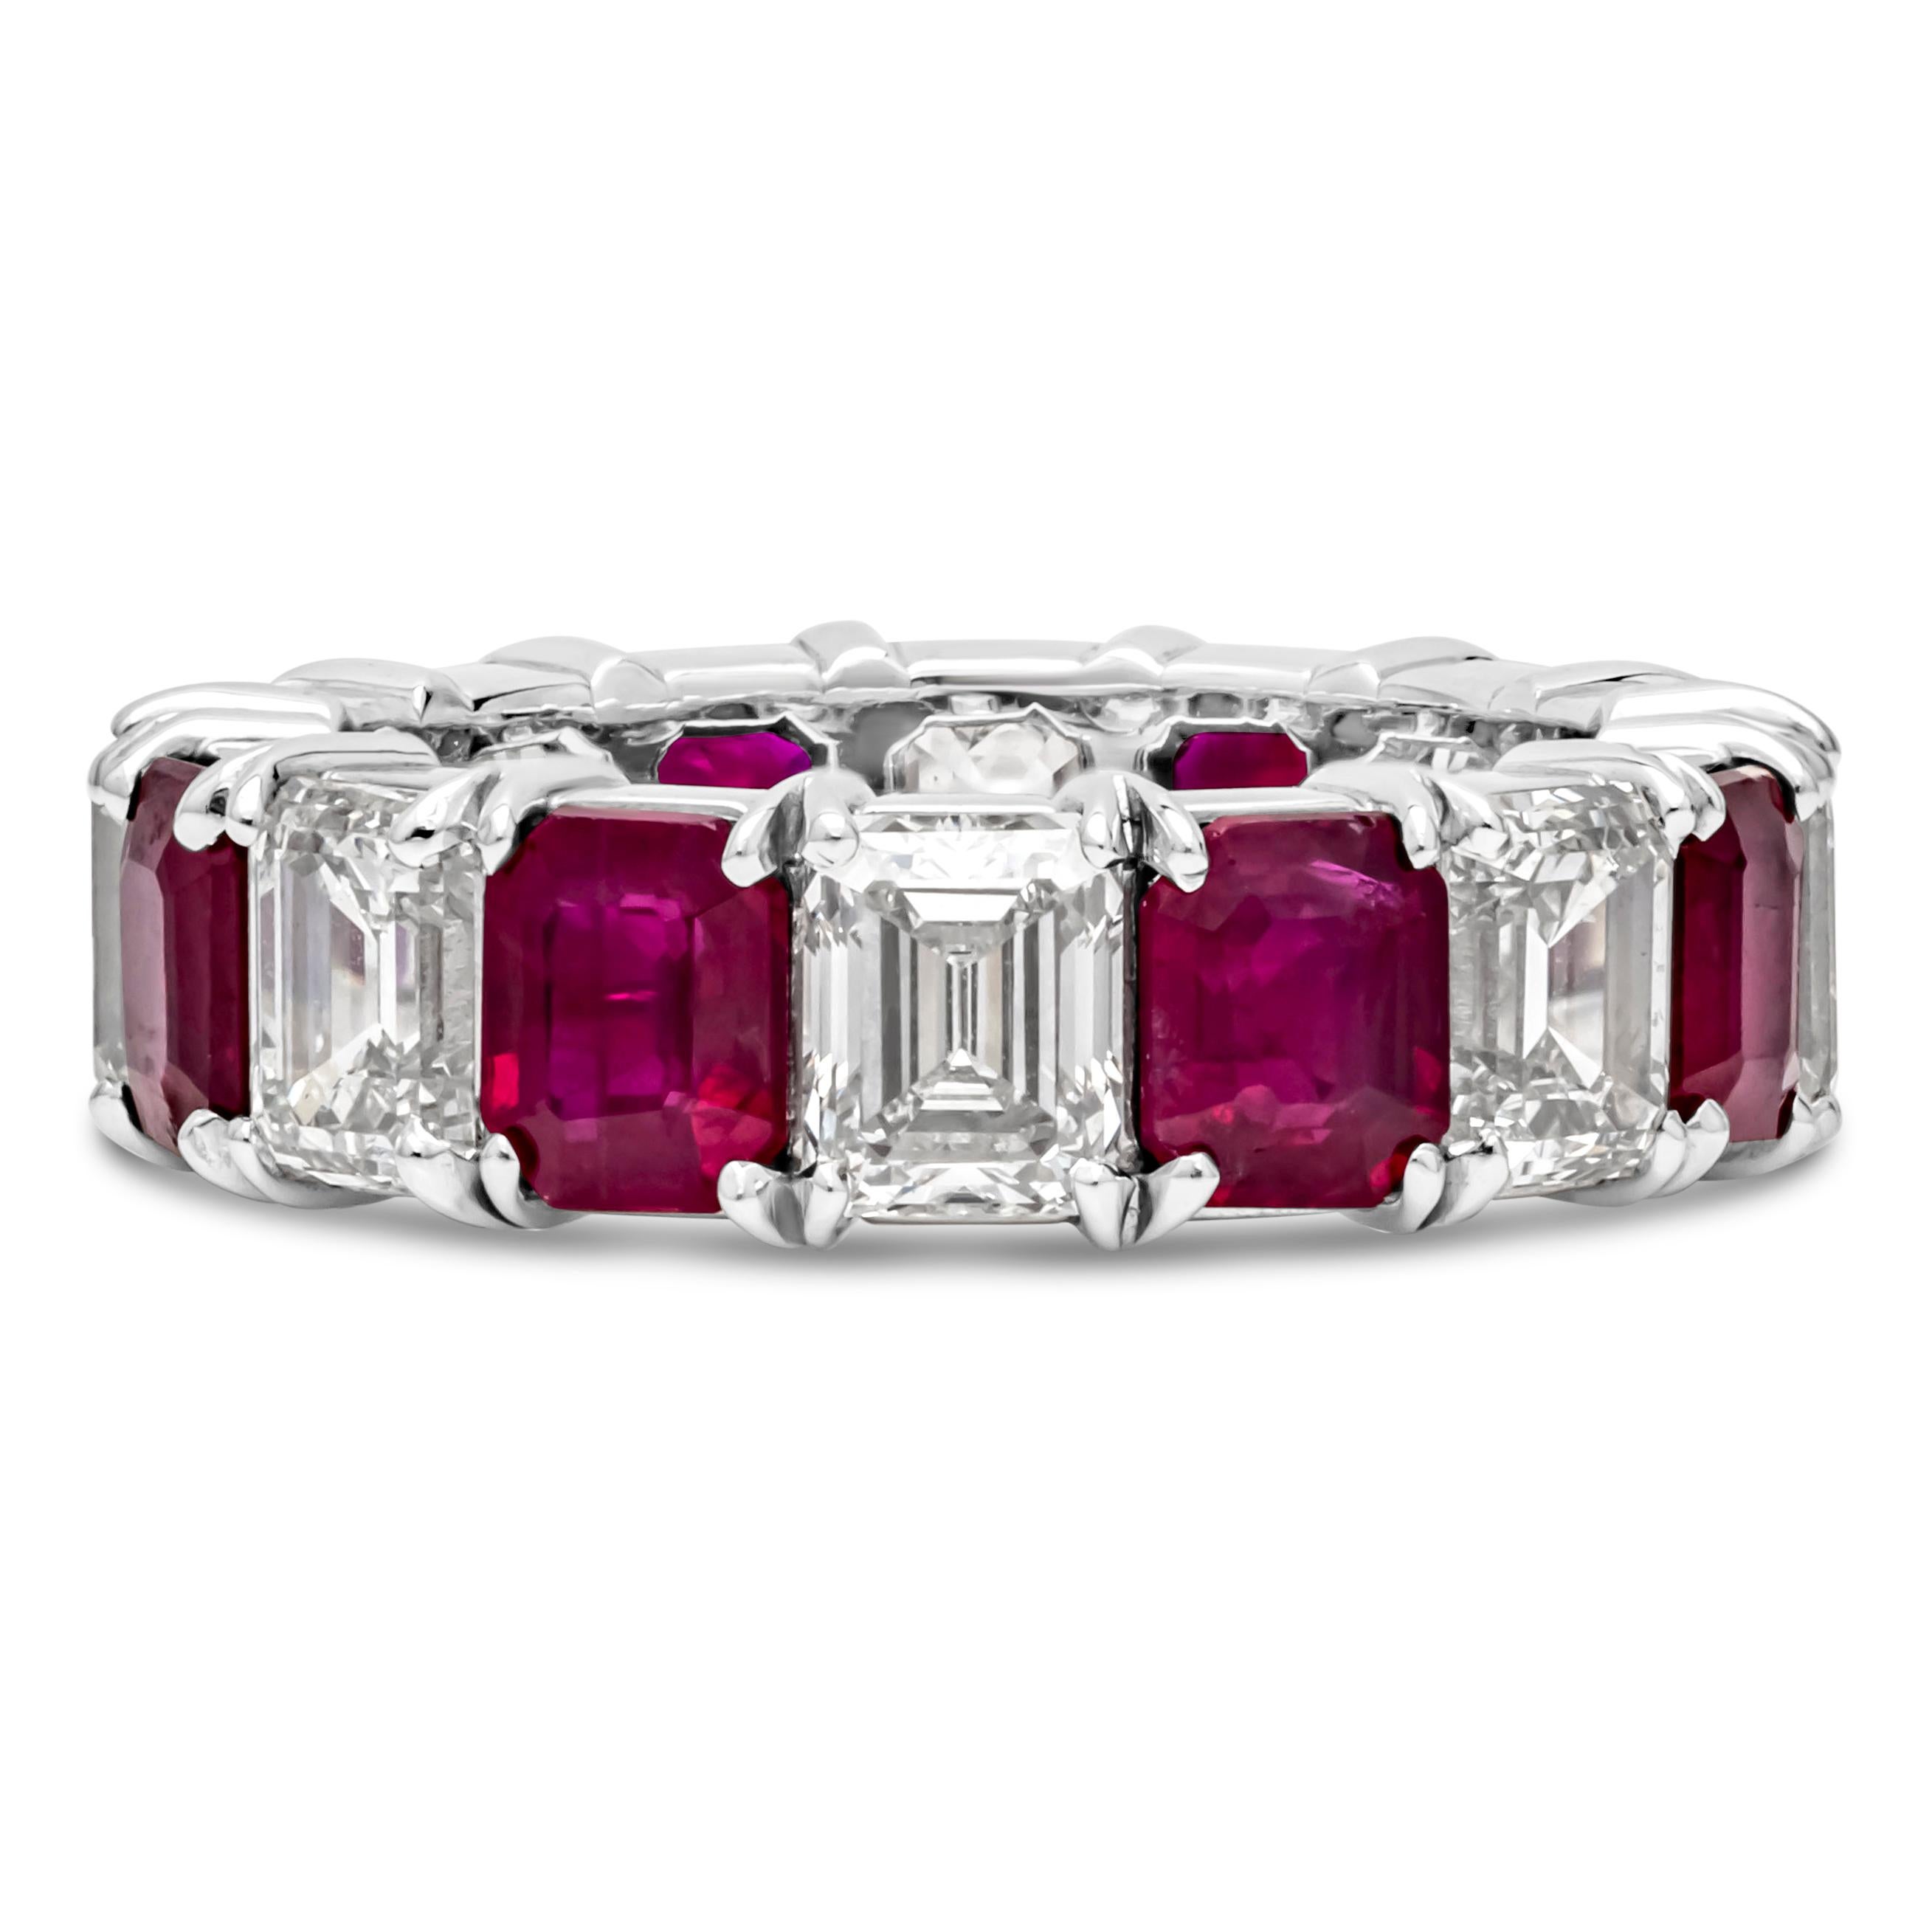 This all around wedding band features 8 emerald-cut natural rubies weighing 4.18 carats total and 8 emerald-cut diamonds weighing 4.09 carat total. The diamonds are H Color and VS in Clarity. Made with Platinum. Size 5.5 US resizable upon request